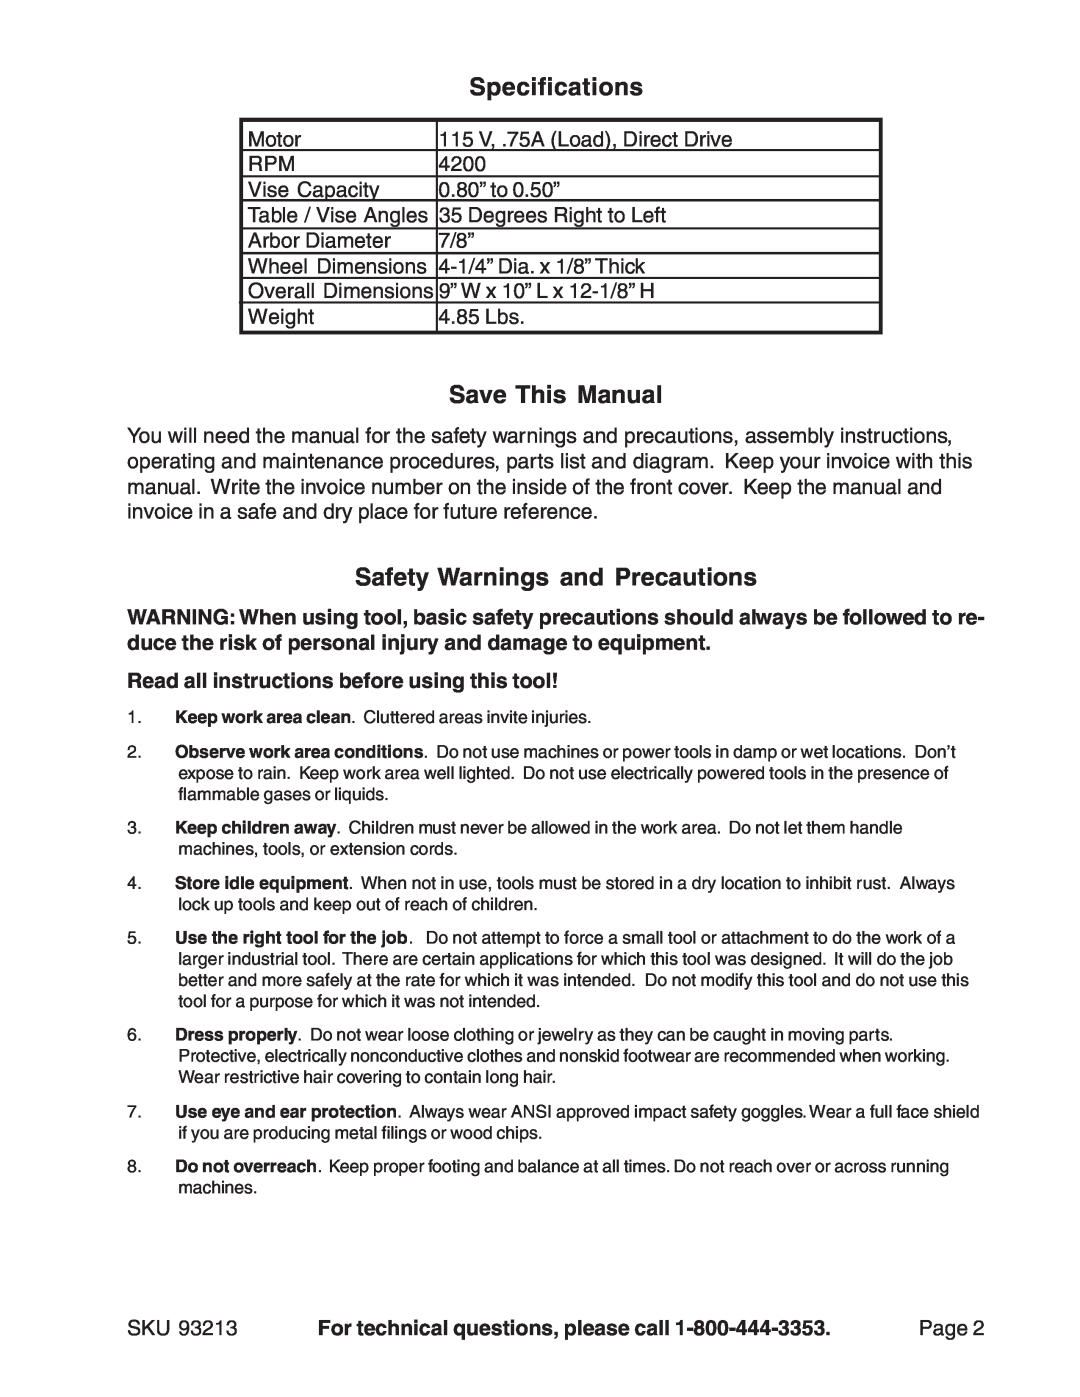 Harbor Freight Tools 93213 manual Specifications, Save This Manual, Safety Warnings and Precautions 